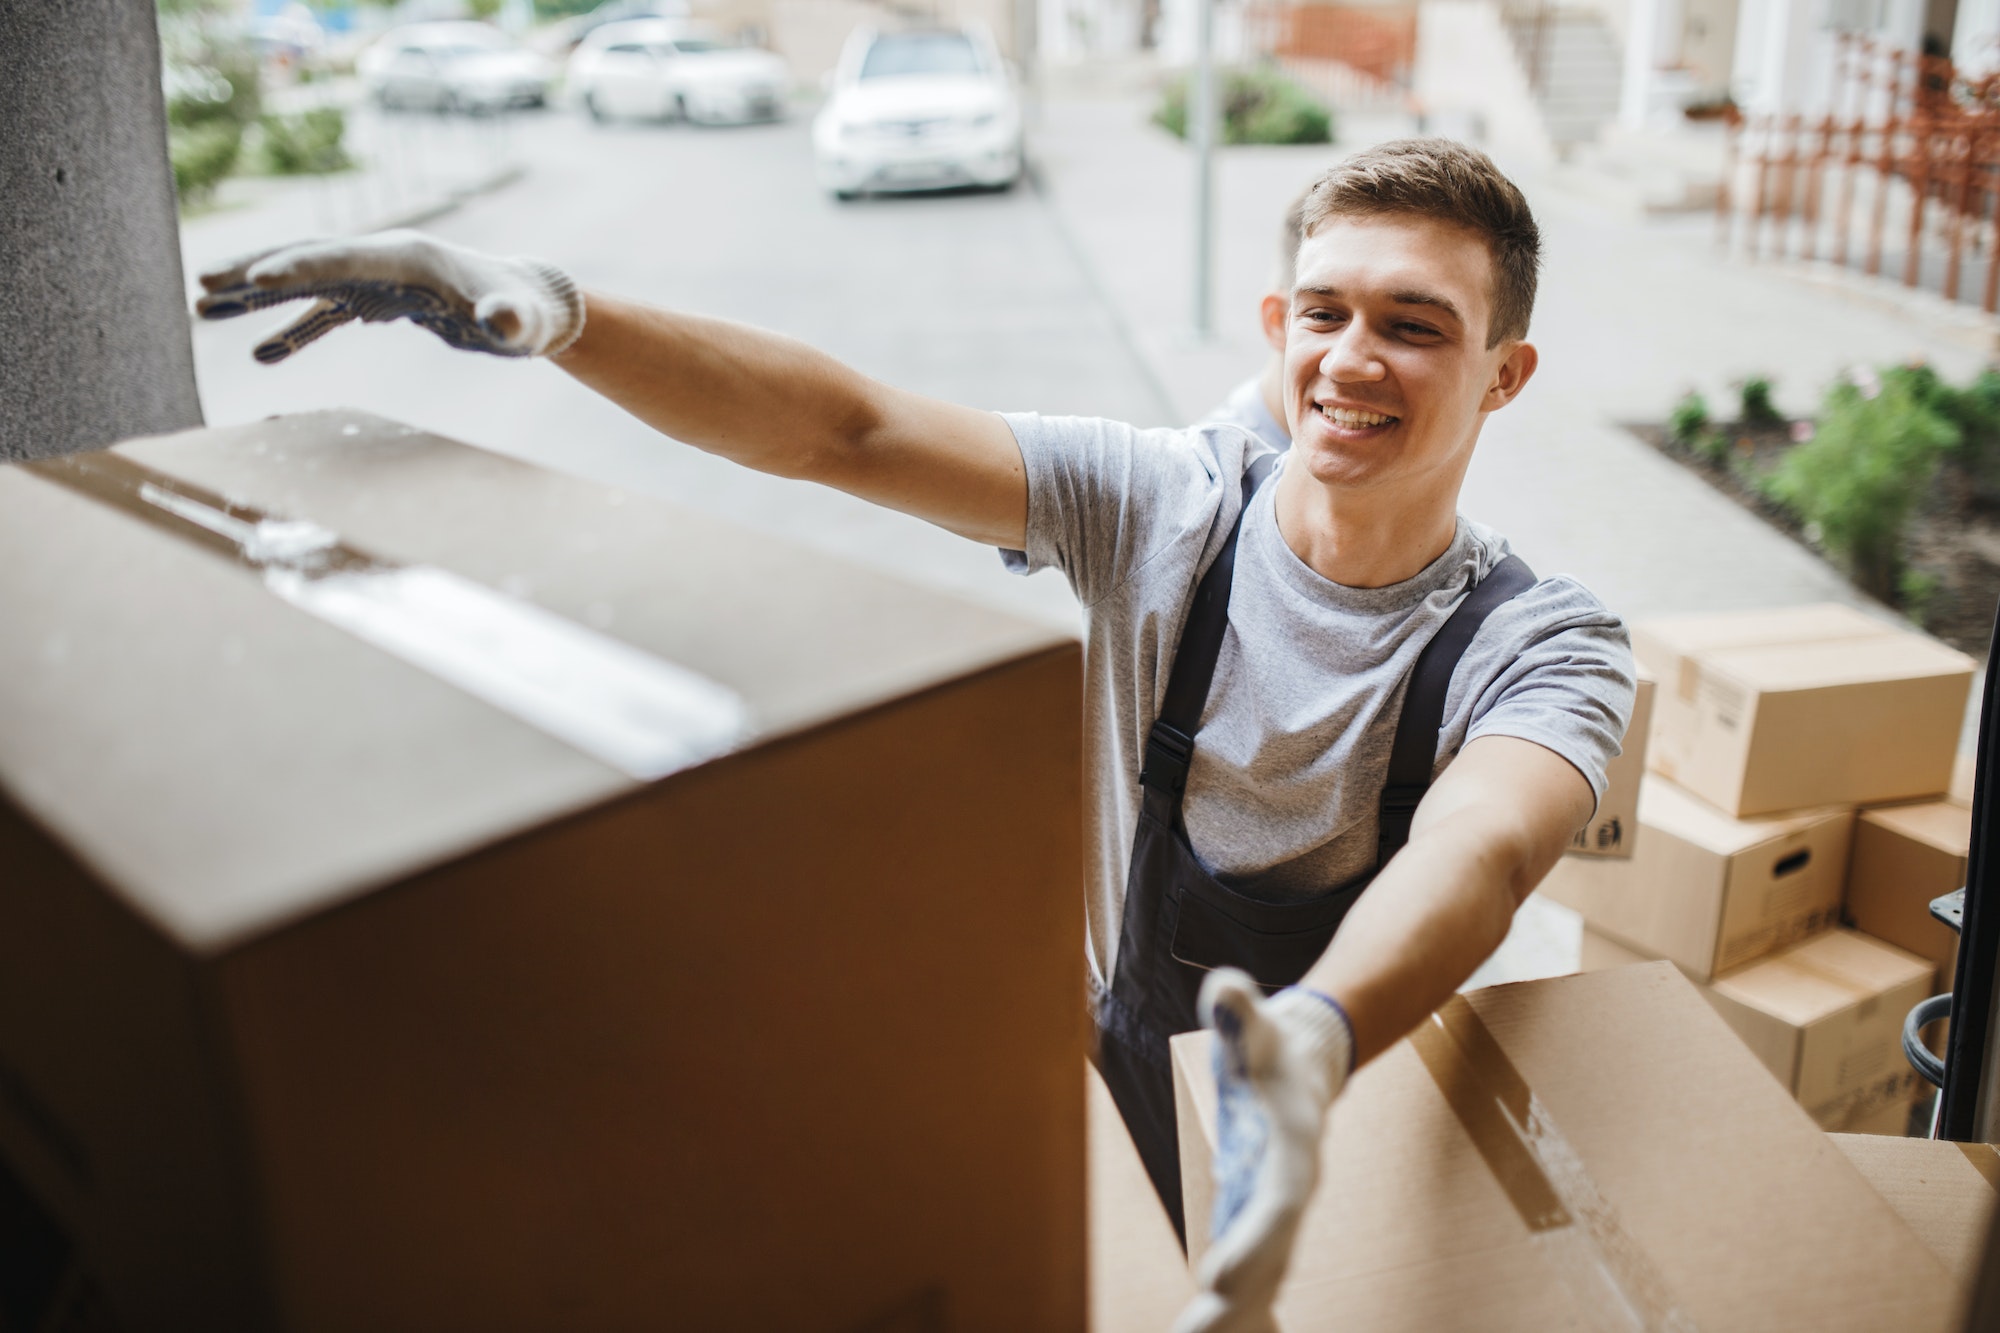 A young handsome smiling mover wearing uniform is reaching for the box while unloading the van full